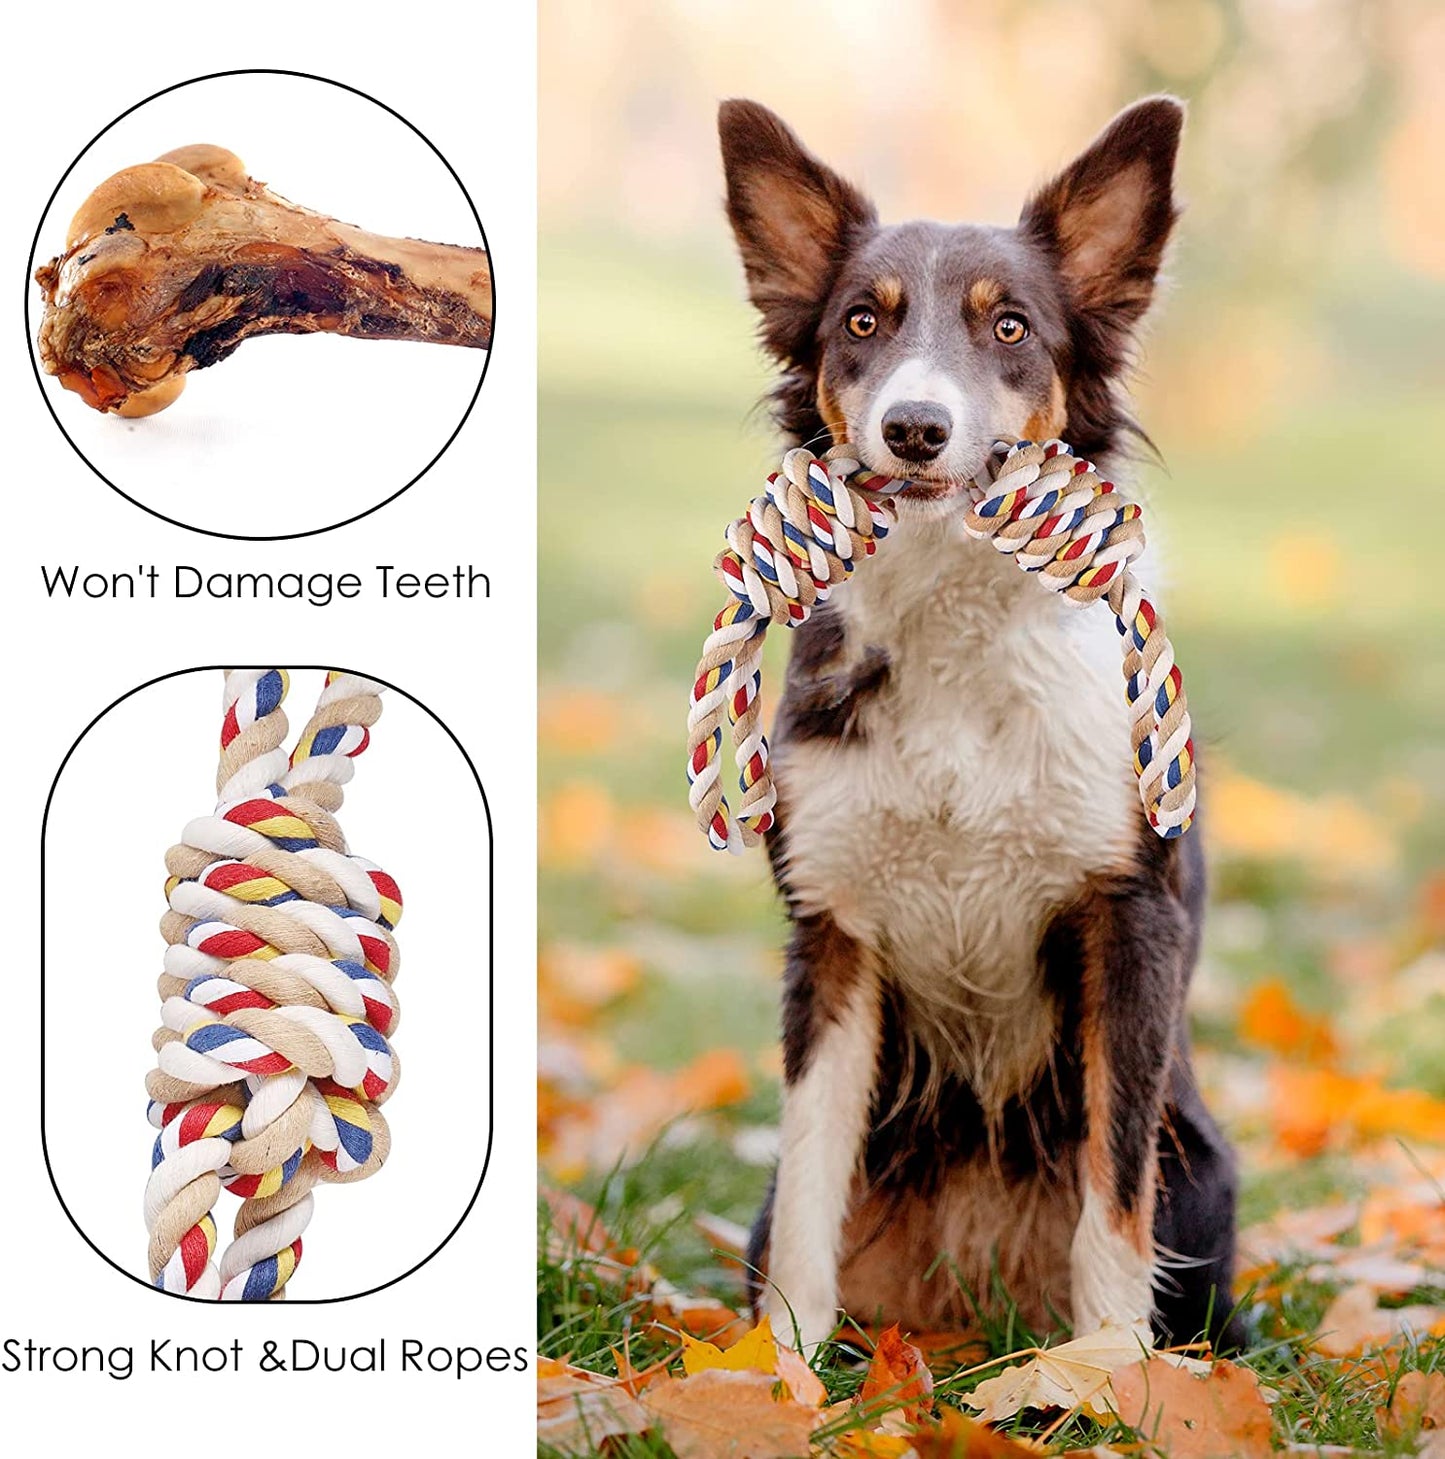 Pawfectpals Indestructible Tough Twisted Dog Chew Rope Toy Teething and Tug of War for Aggressive Chewers (Double Grip Loops and Knots)